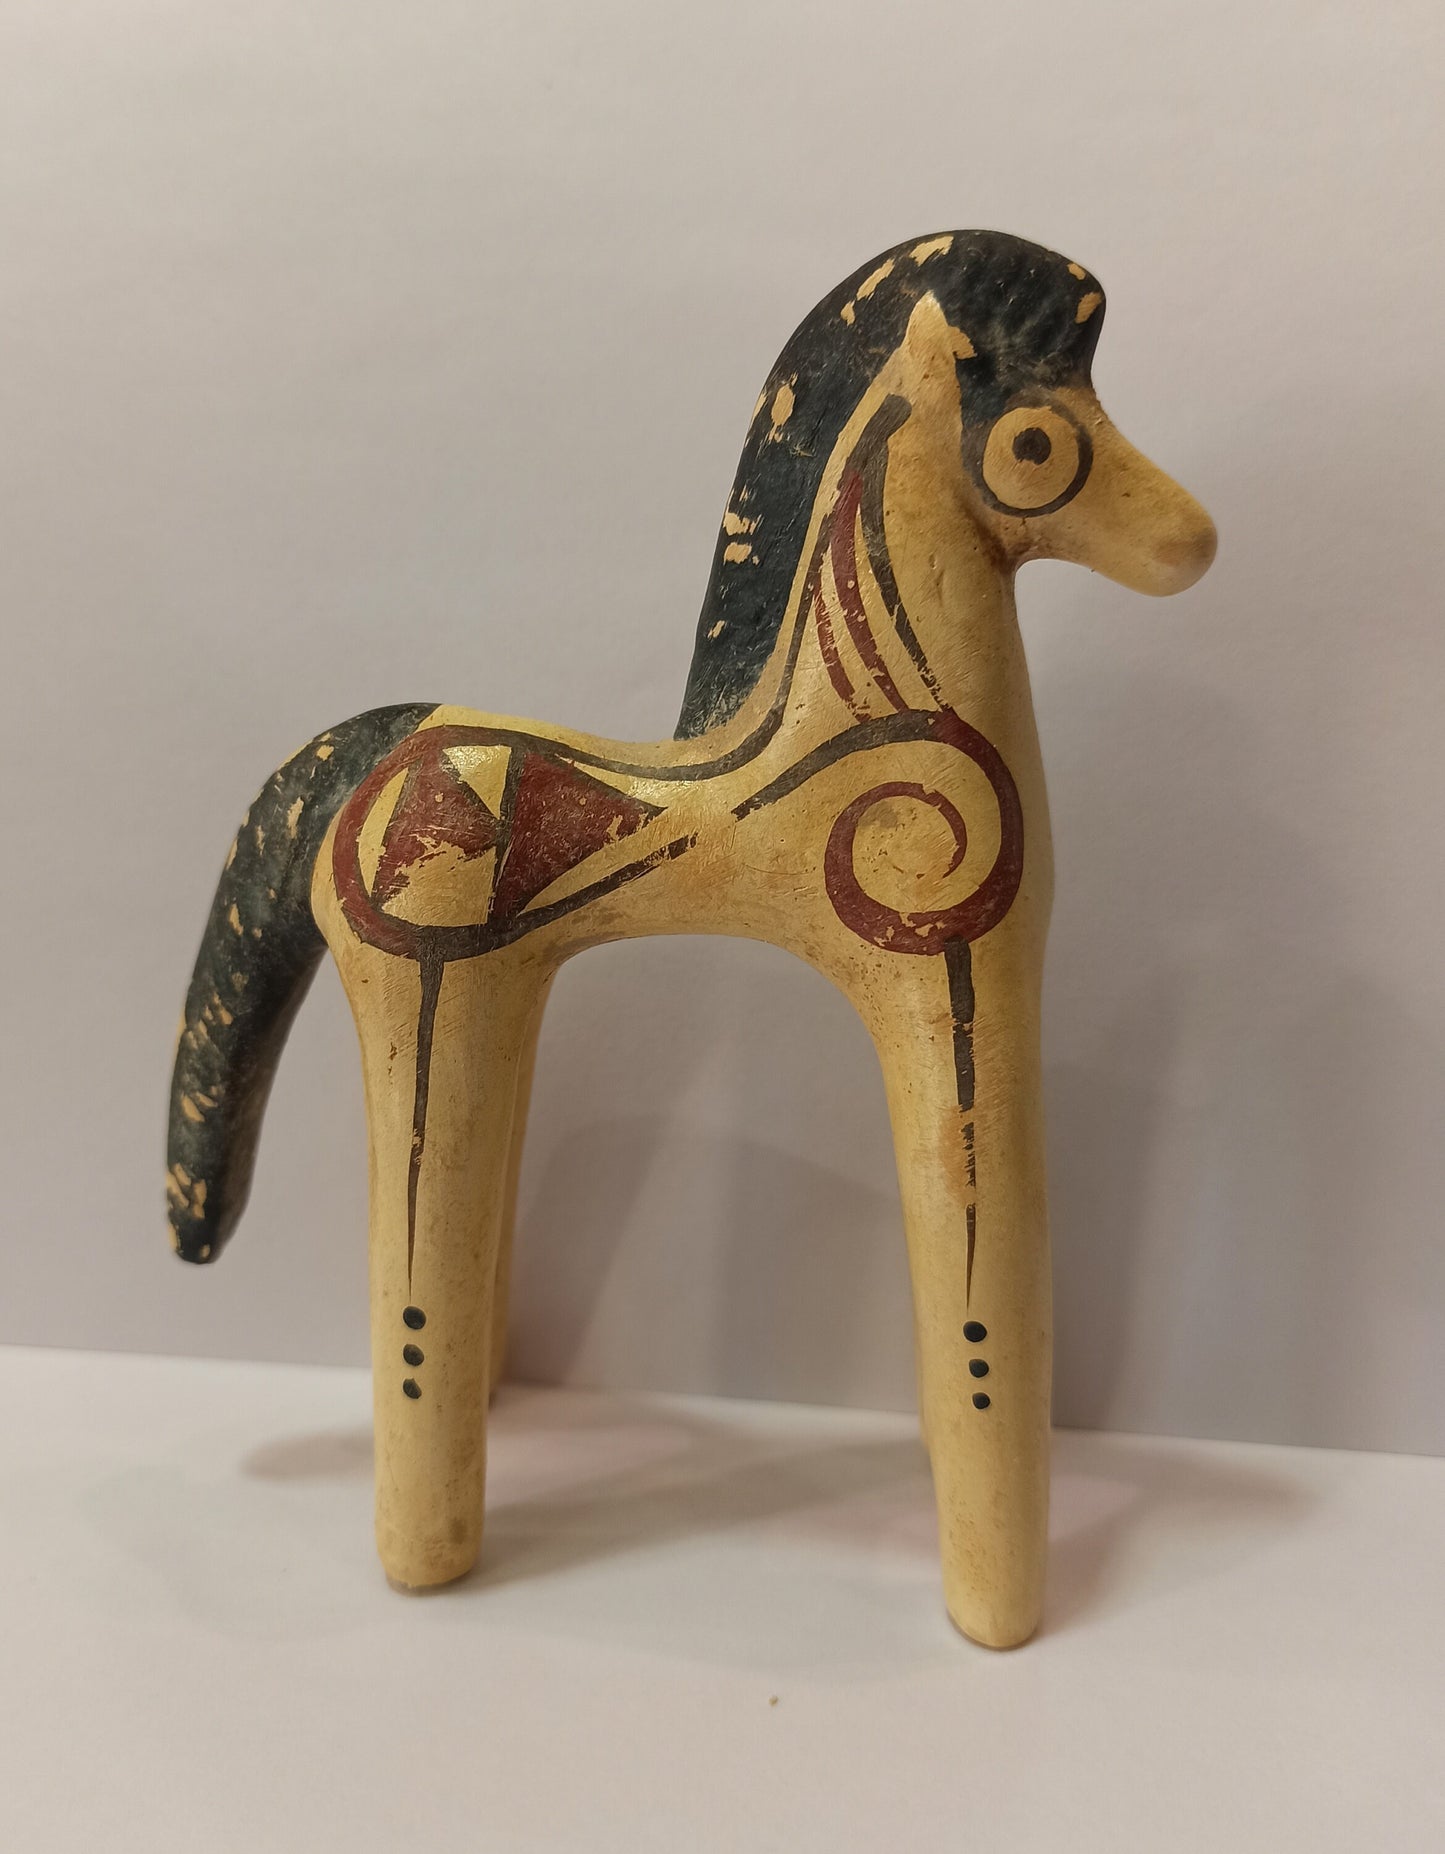 Ancient Greek Horse - Used for warfare and for frontier defense, in sacred processions, in marital and funerary rituals - Ceramic Artifact